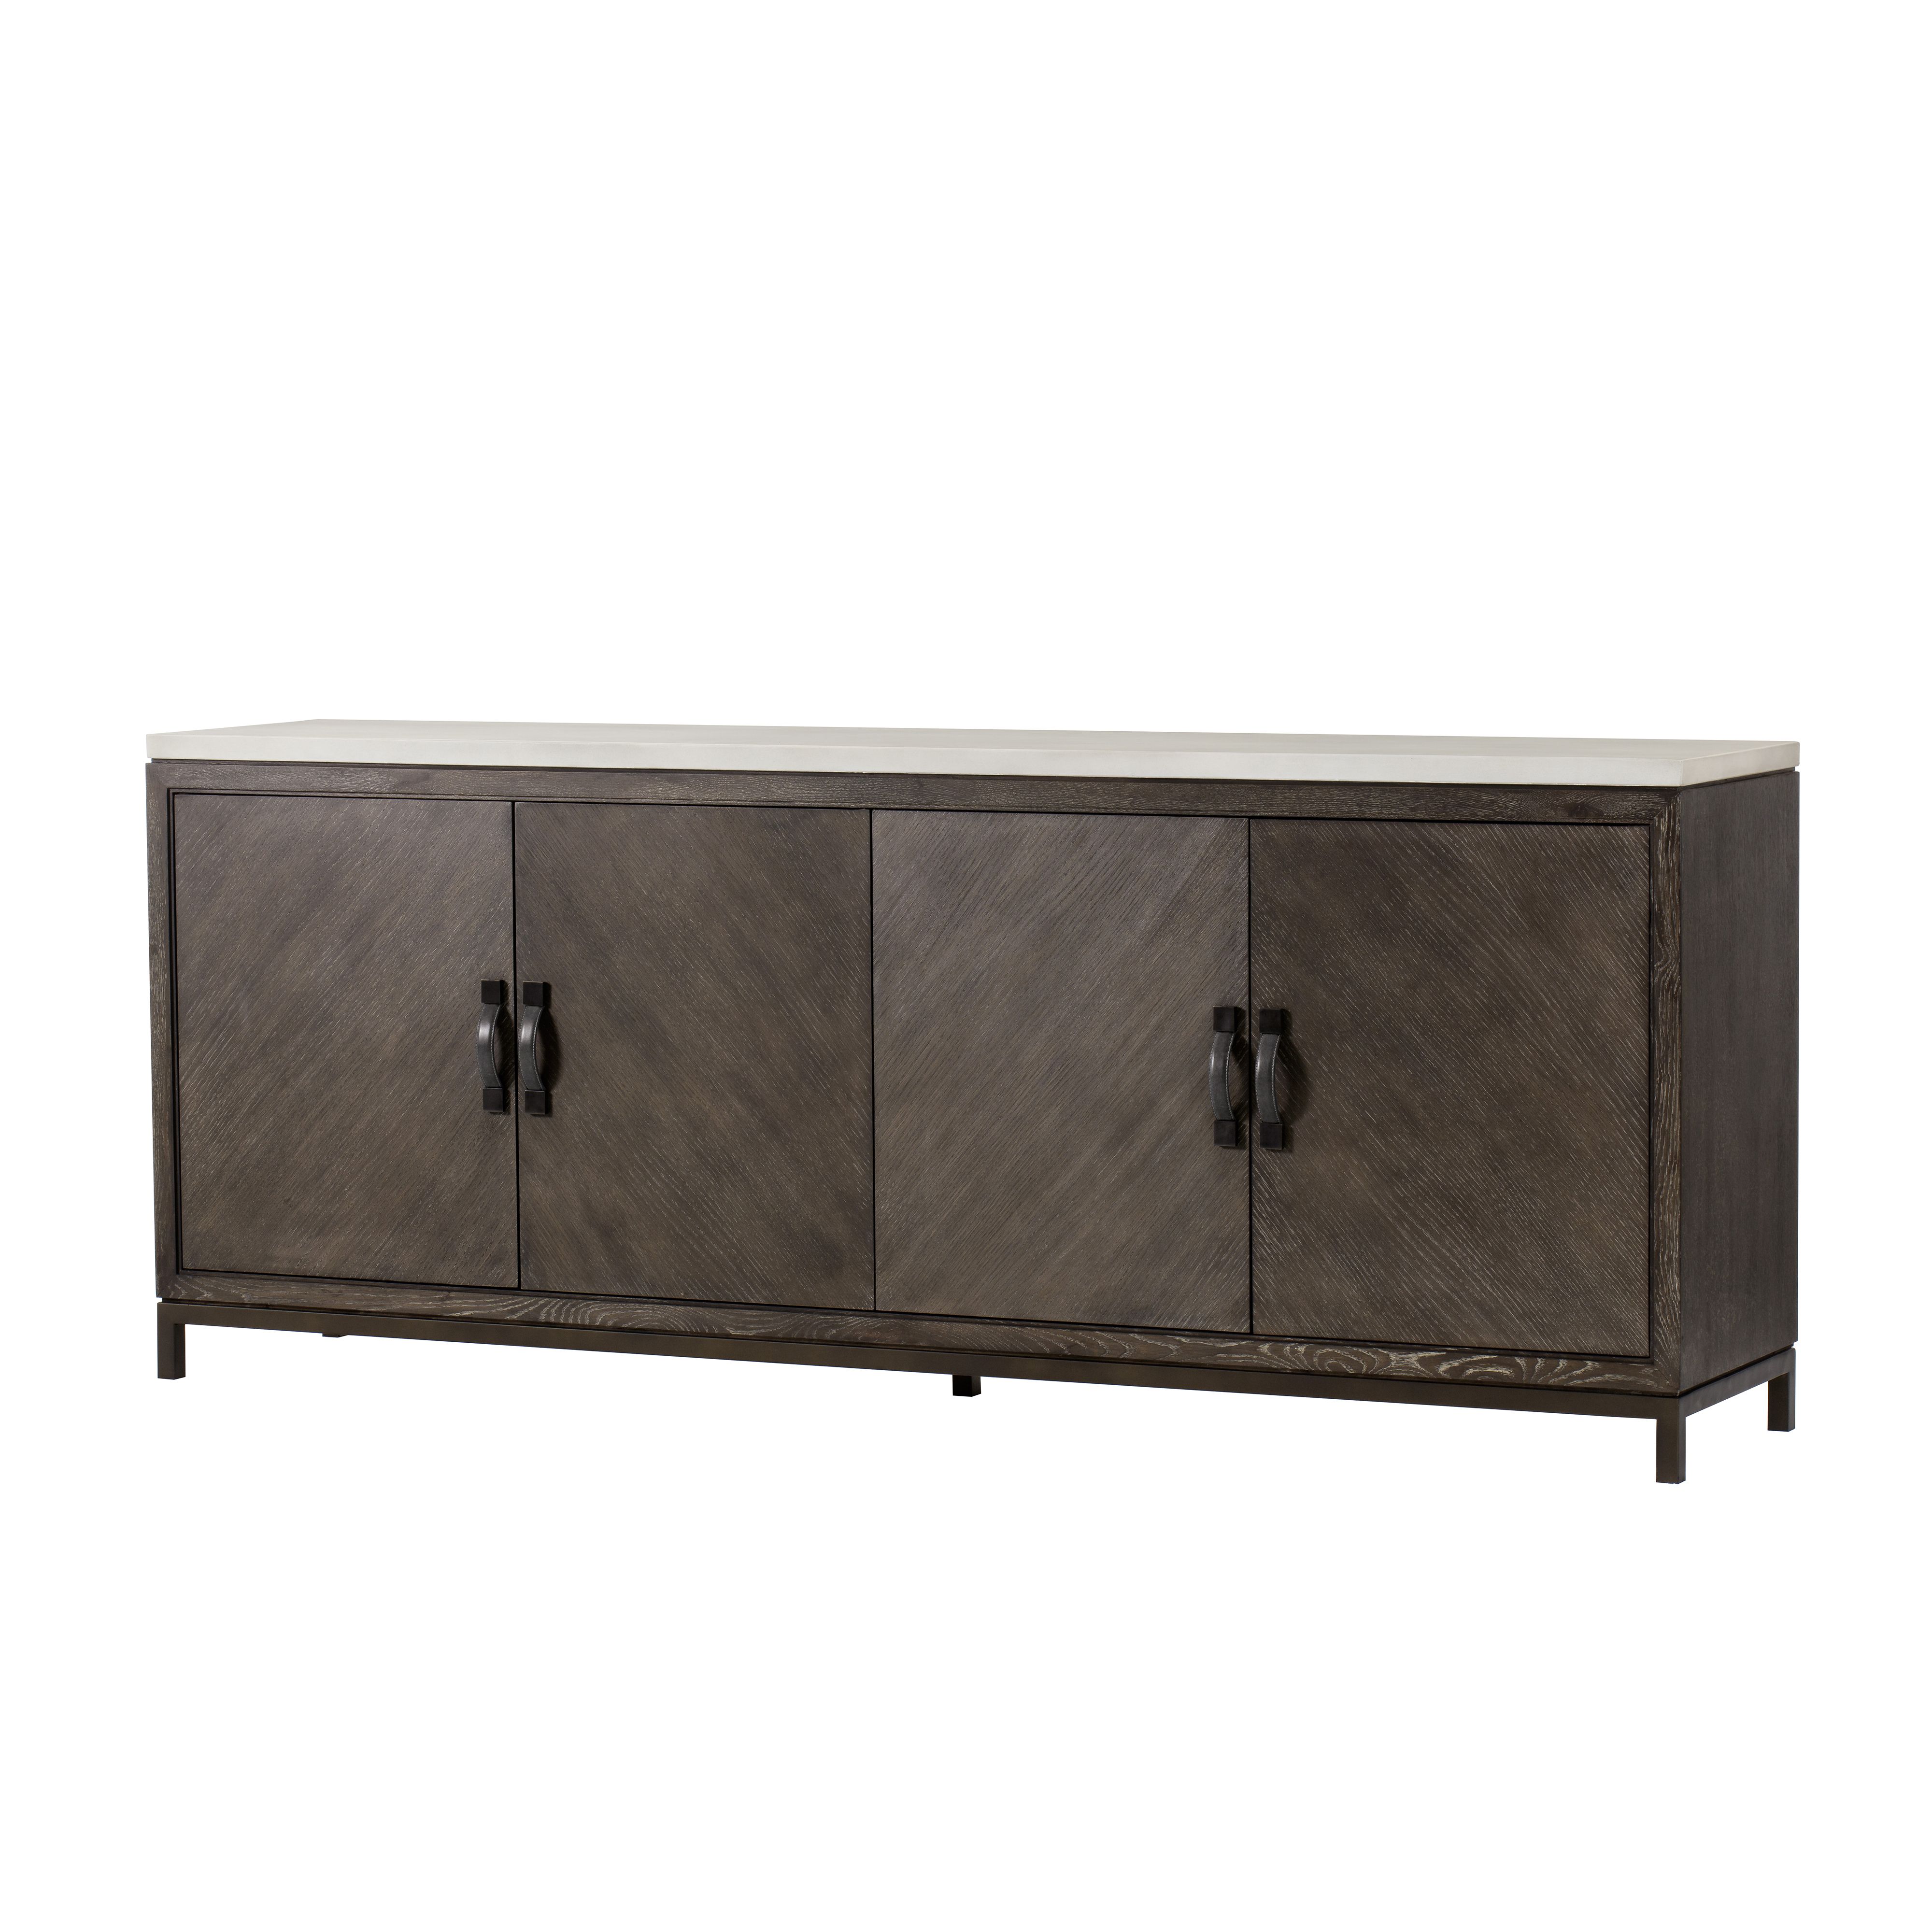 Monarch Kendall Sideboard In 2019 | Deborah's Theme Pertaining To Current Kendall Sideboards (View 12 of 20)